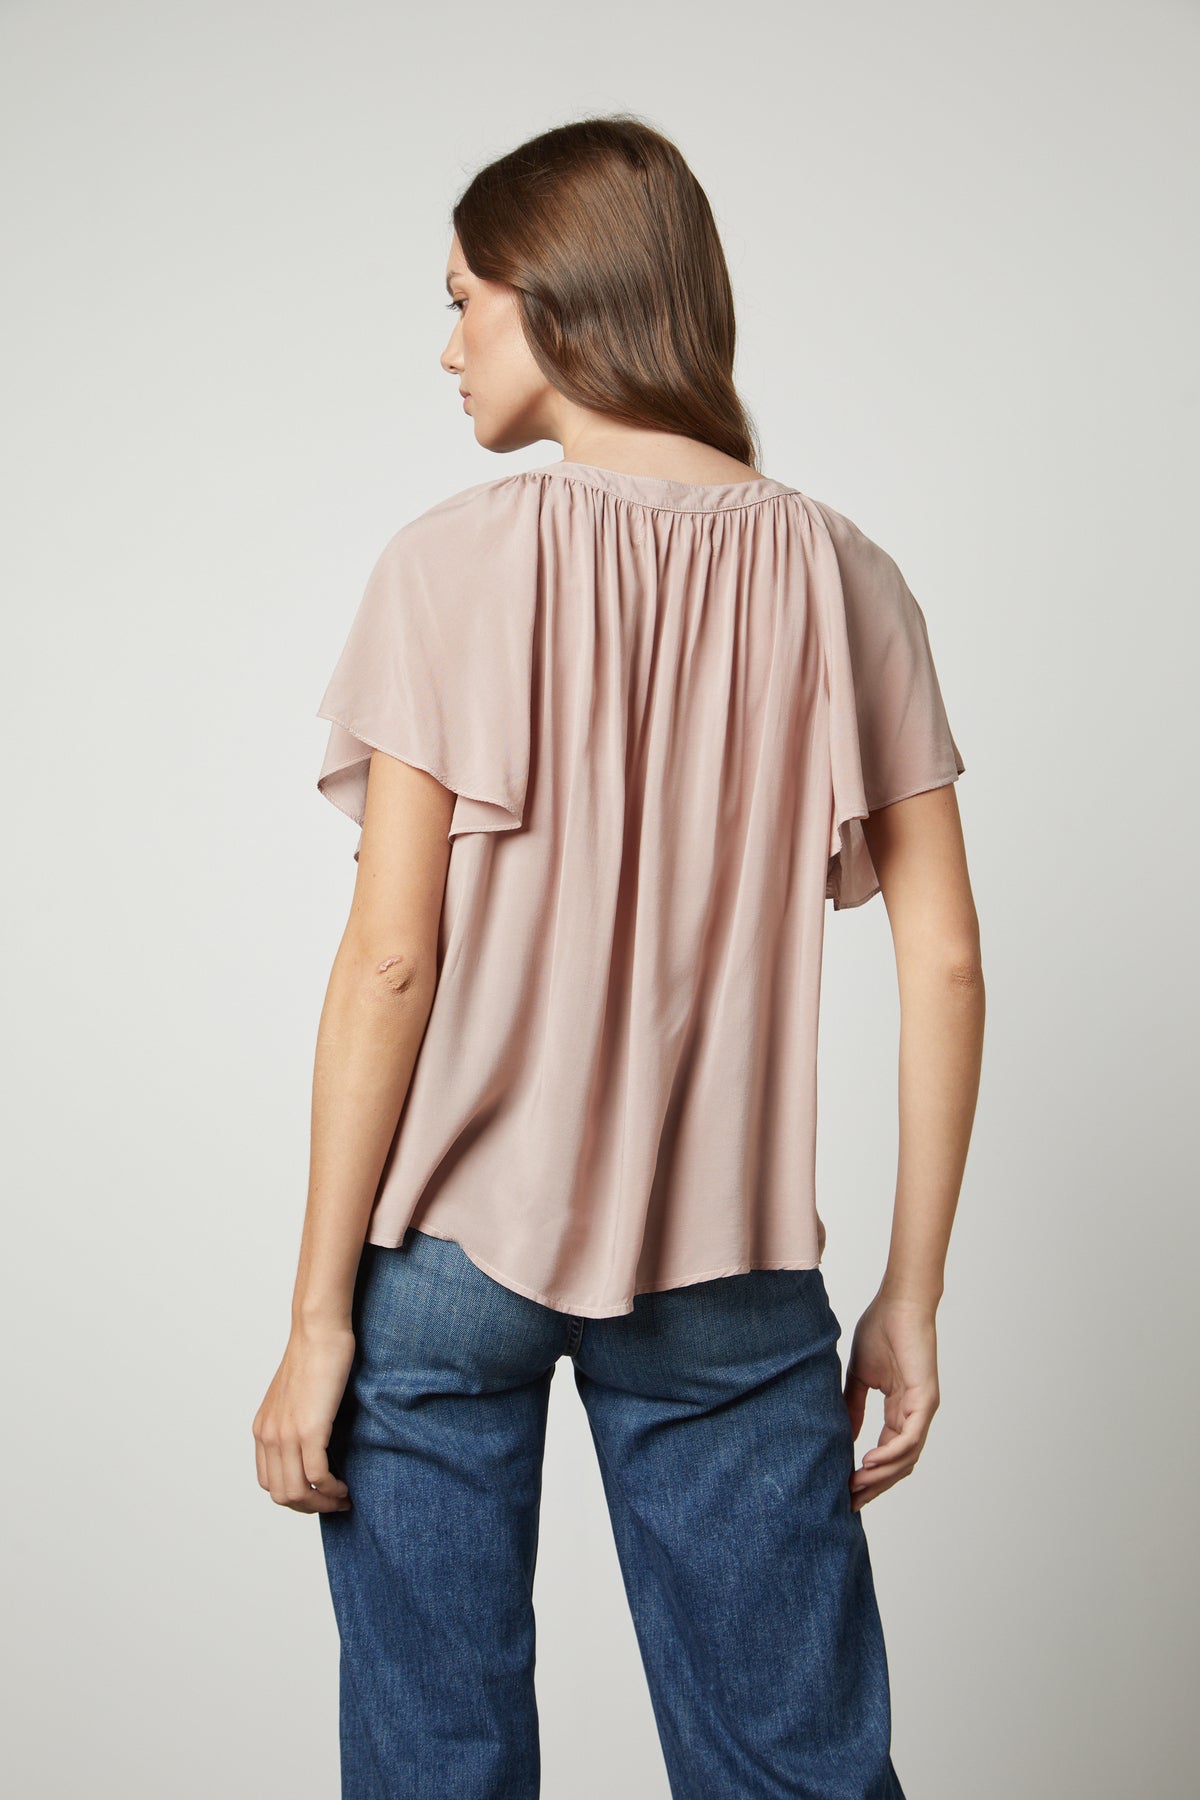 The back view of a woman wearing jeans and a HARLEY FLUTTER SLEEVE TOP by Velvet by Graham & Spencer.-26727733559489